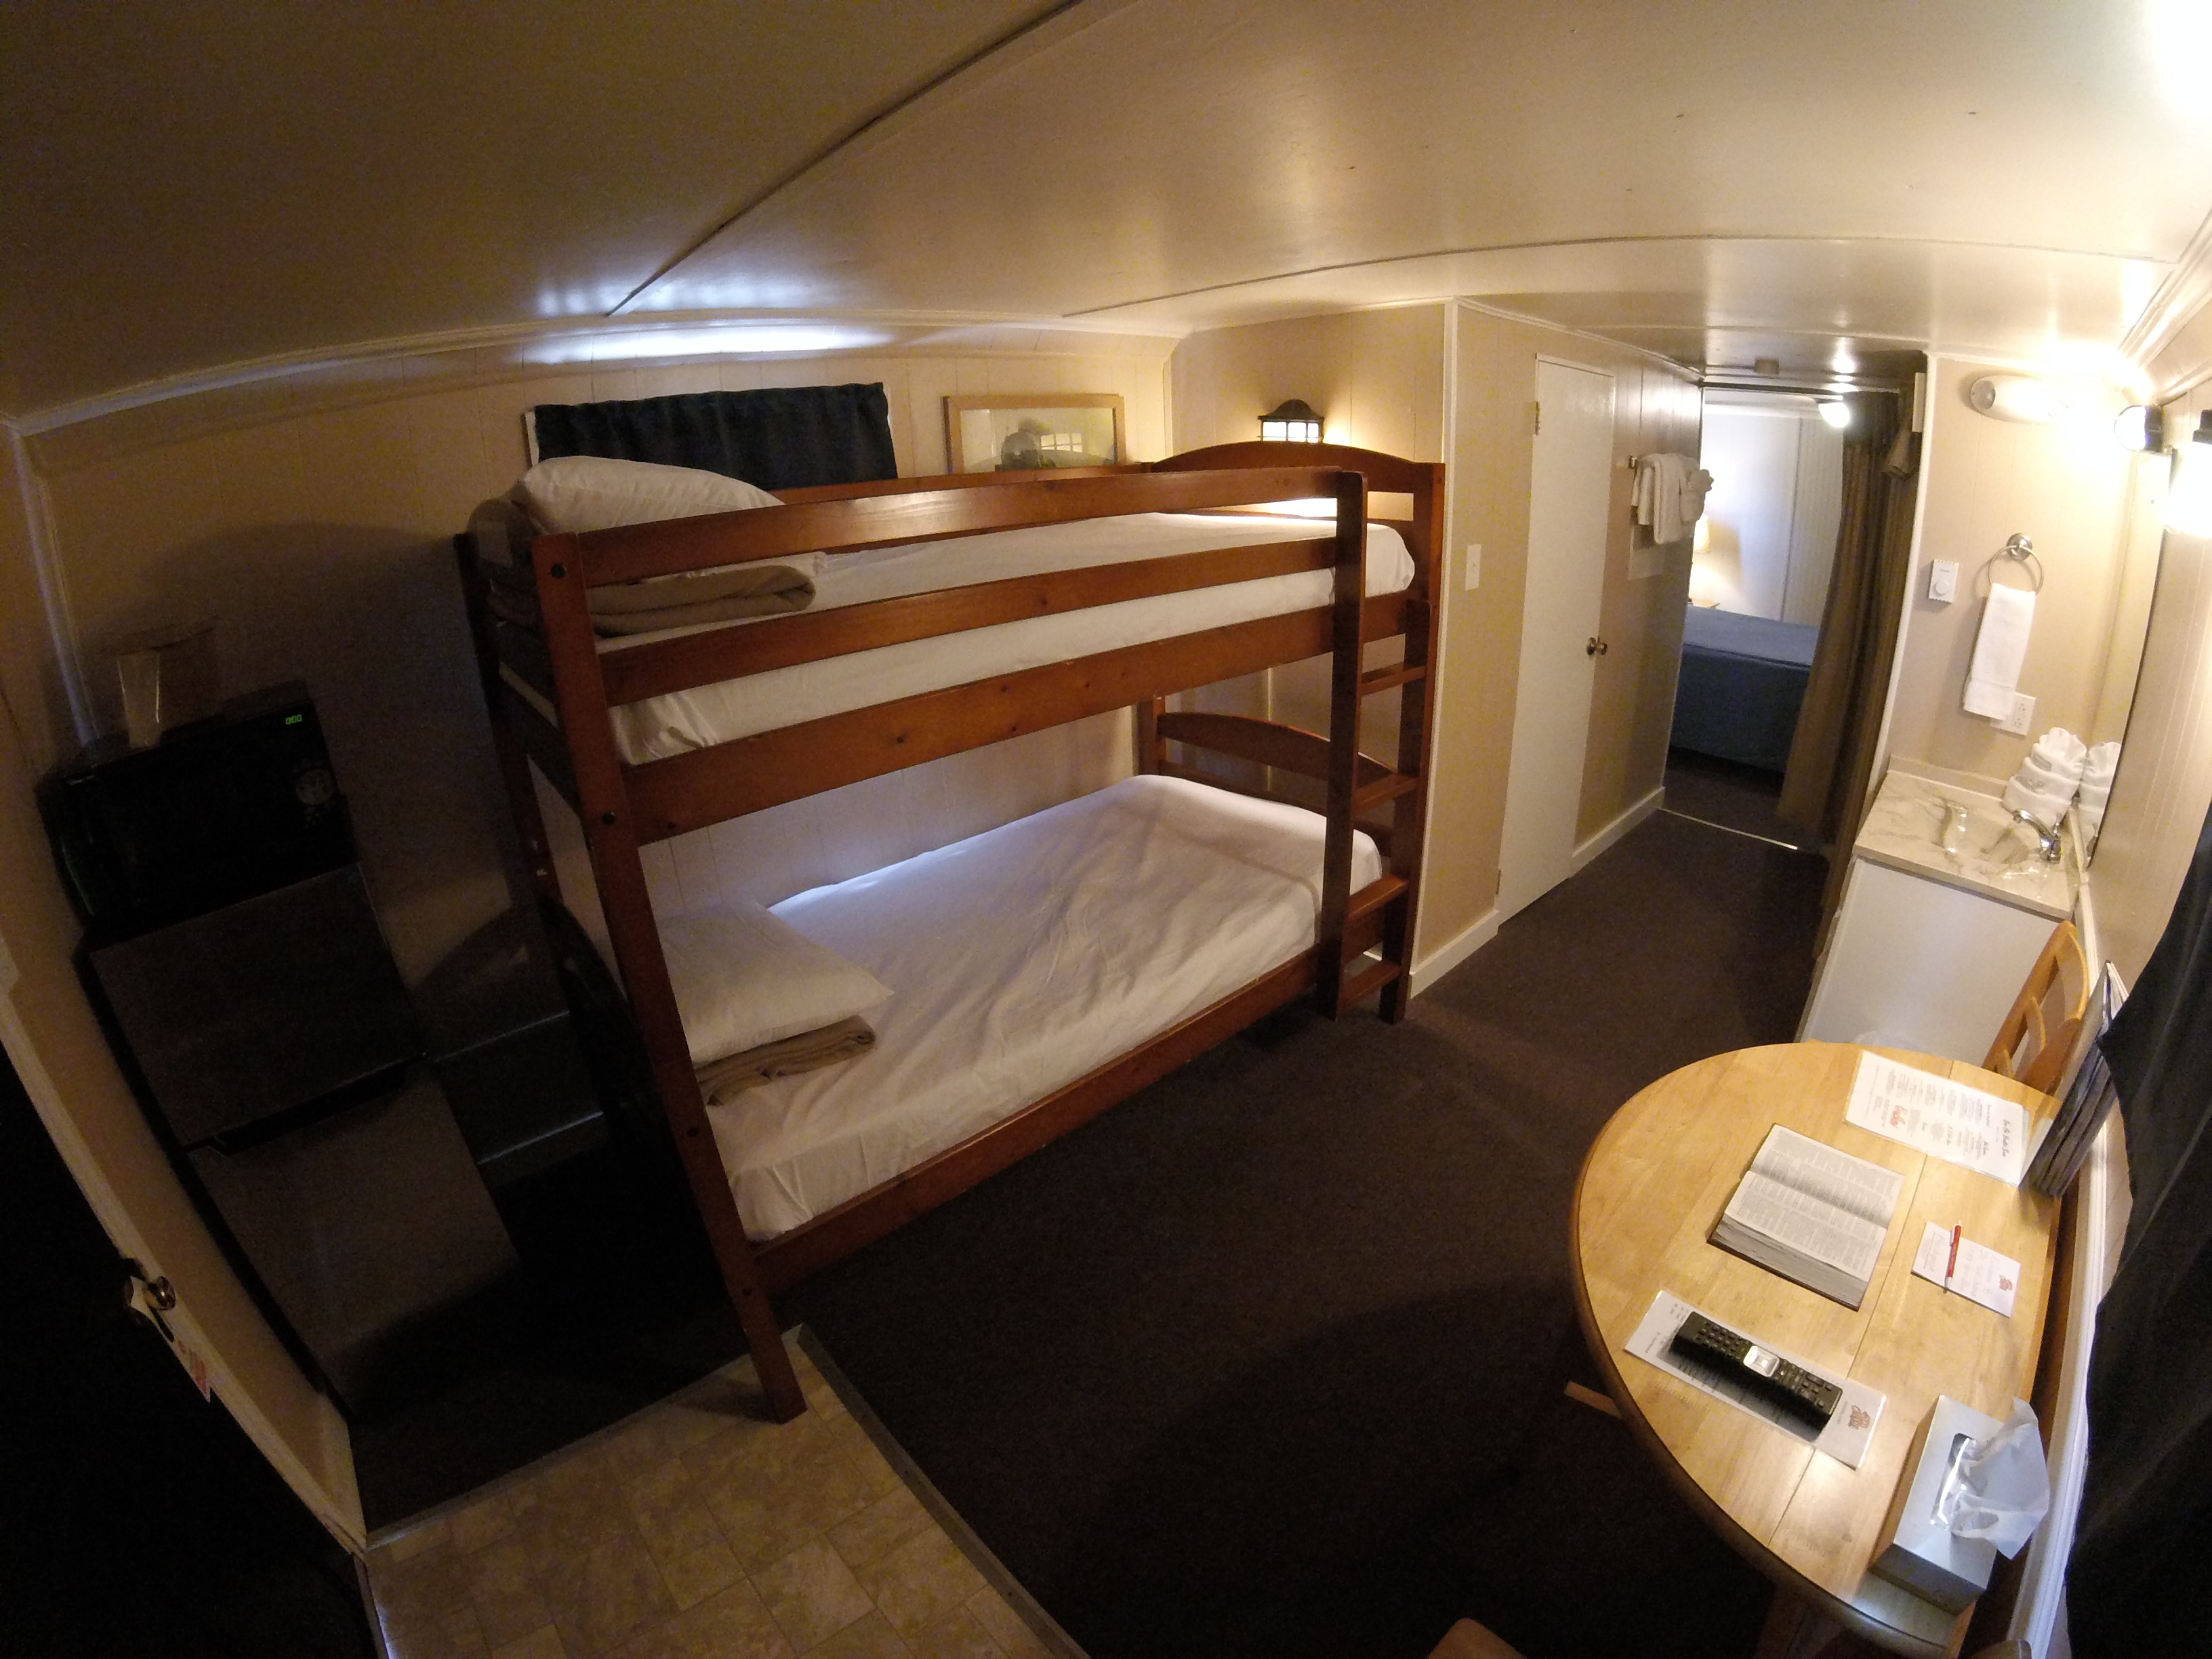 interior view of small family caboose motel room